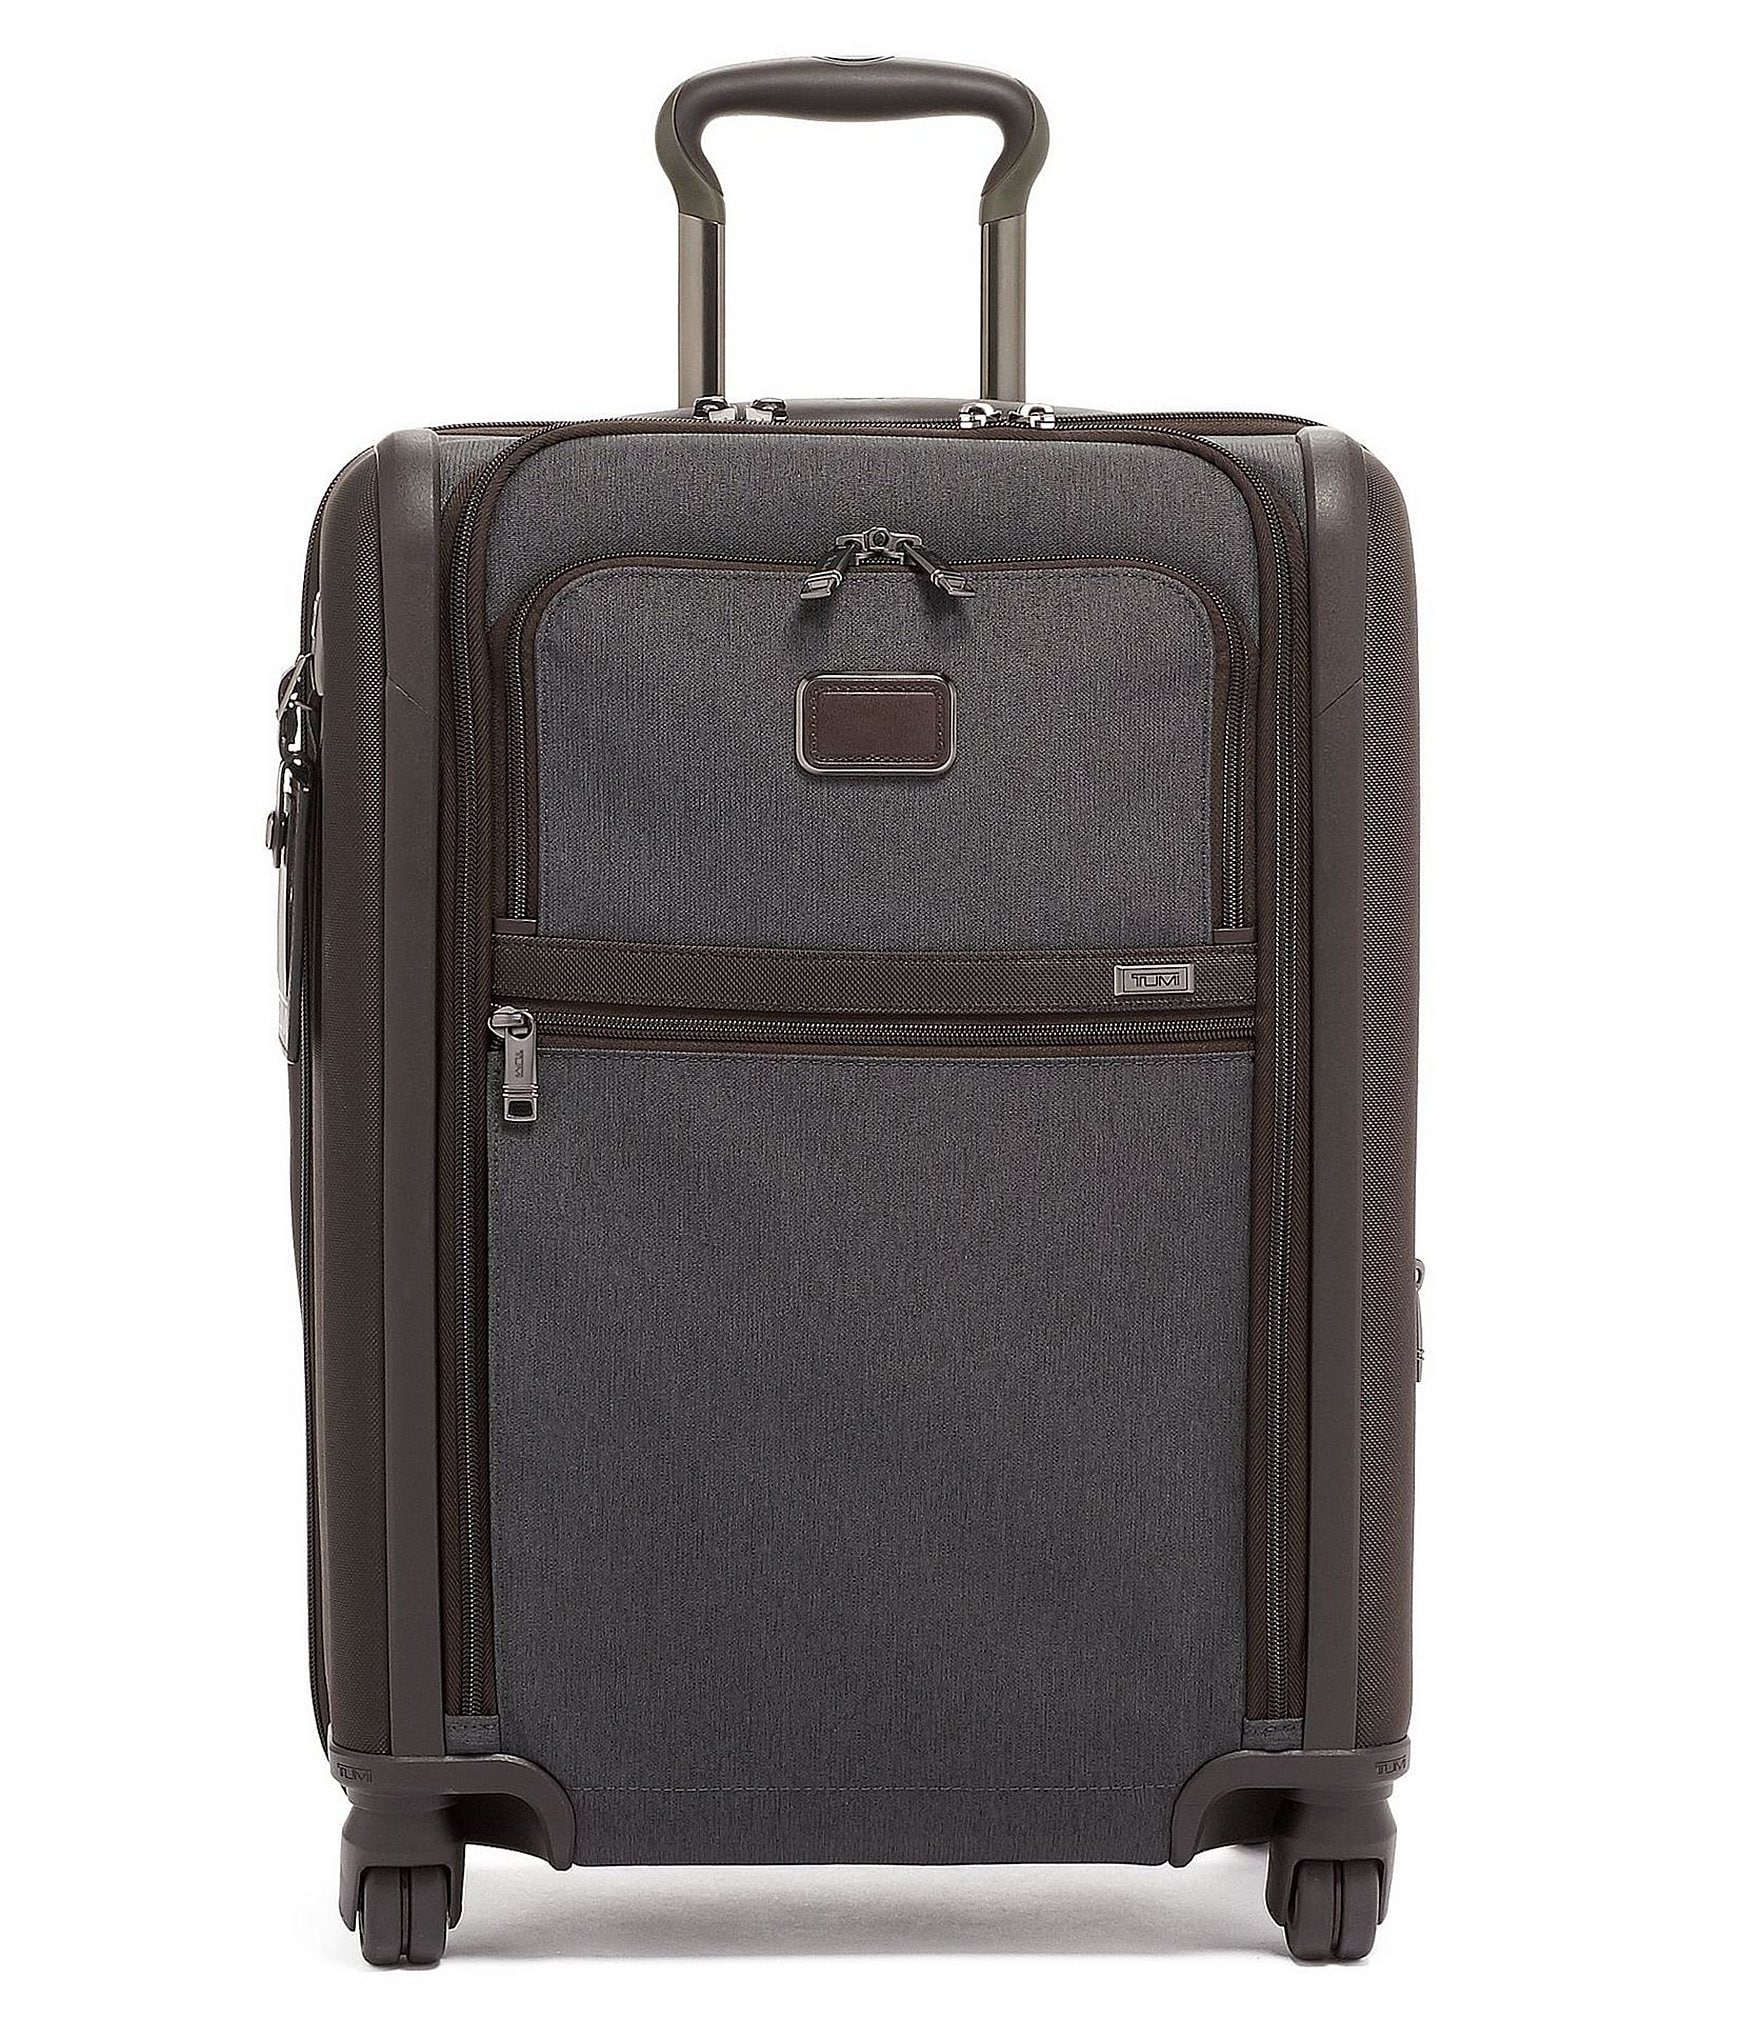 Three piece Tumi luggage set - general for sale - by owner - craigslist